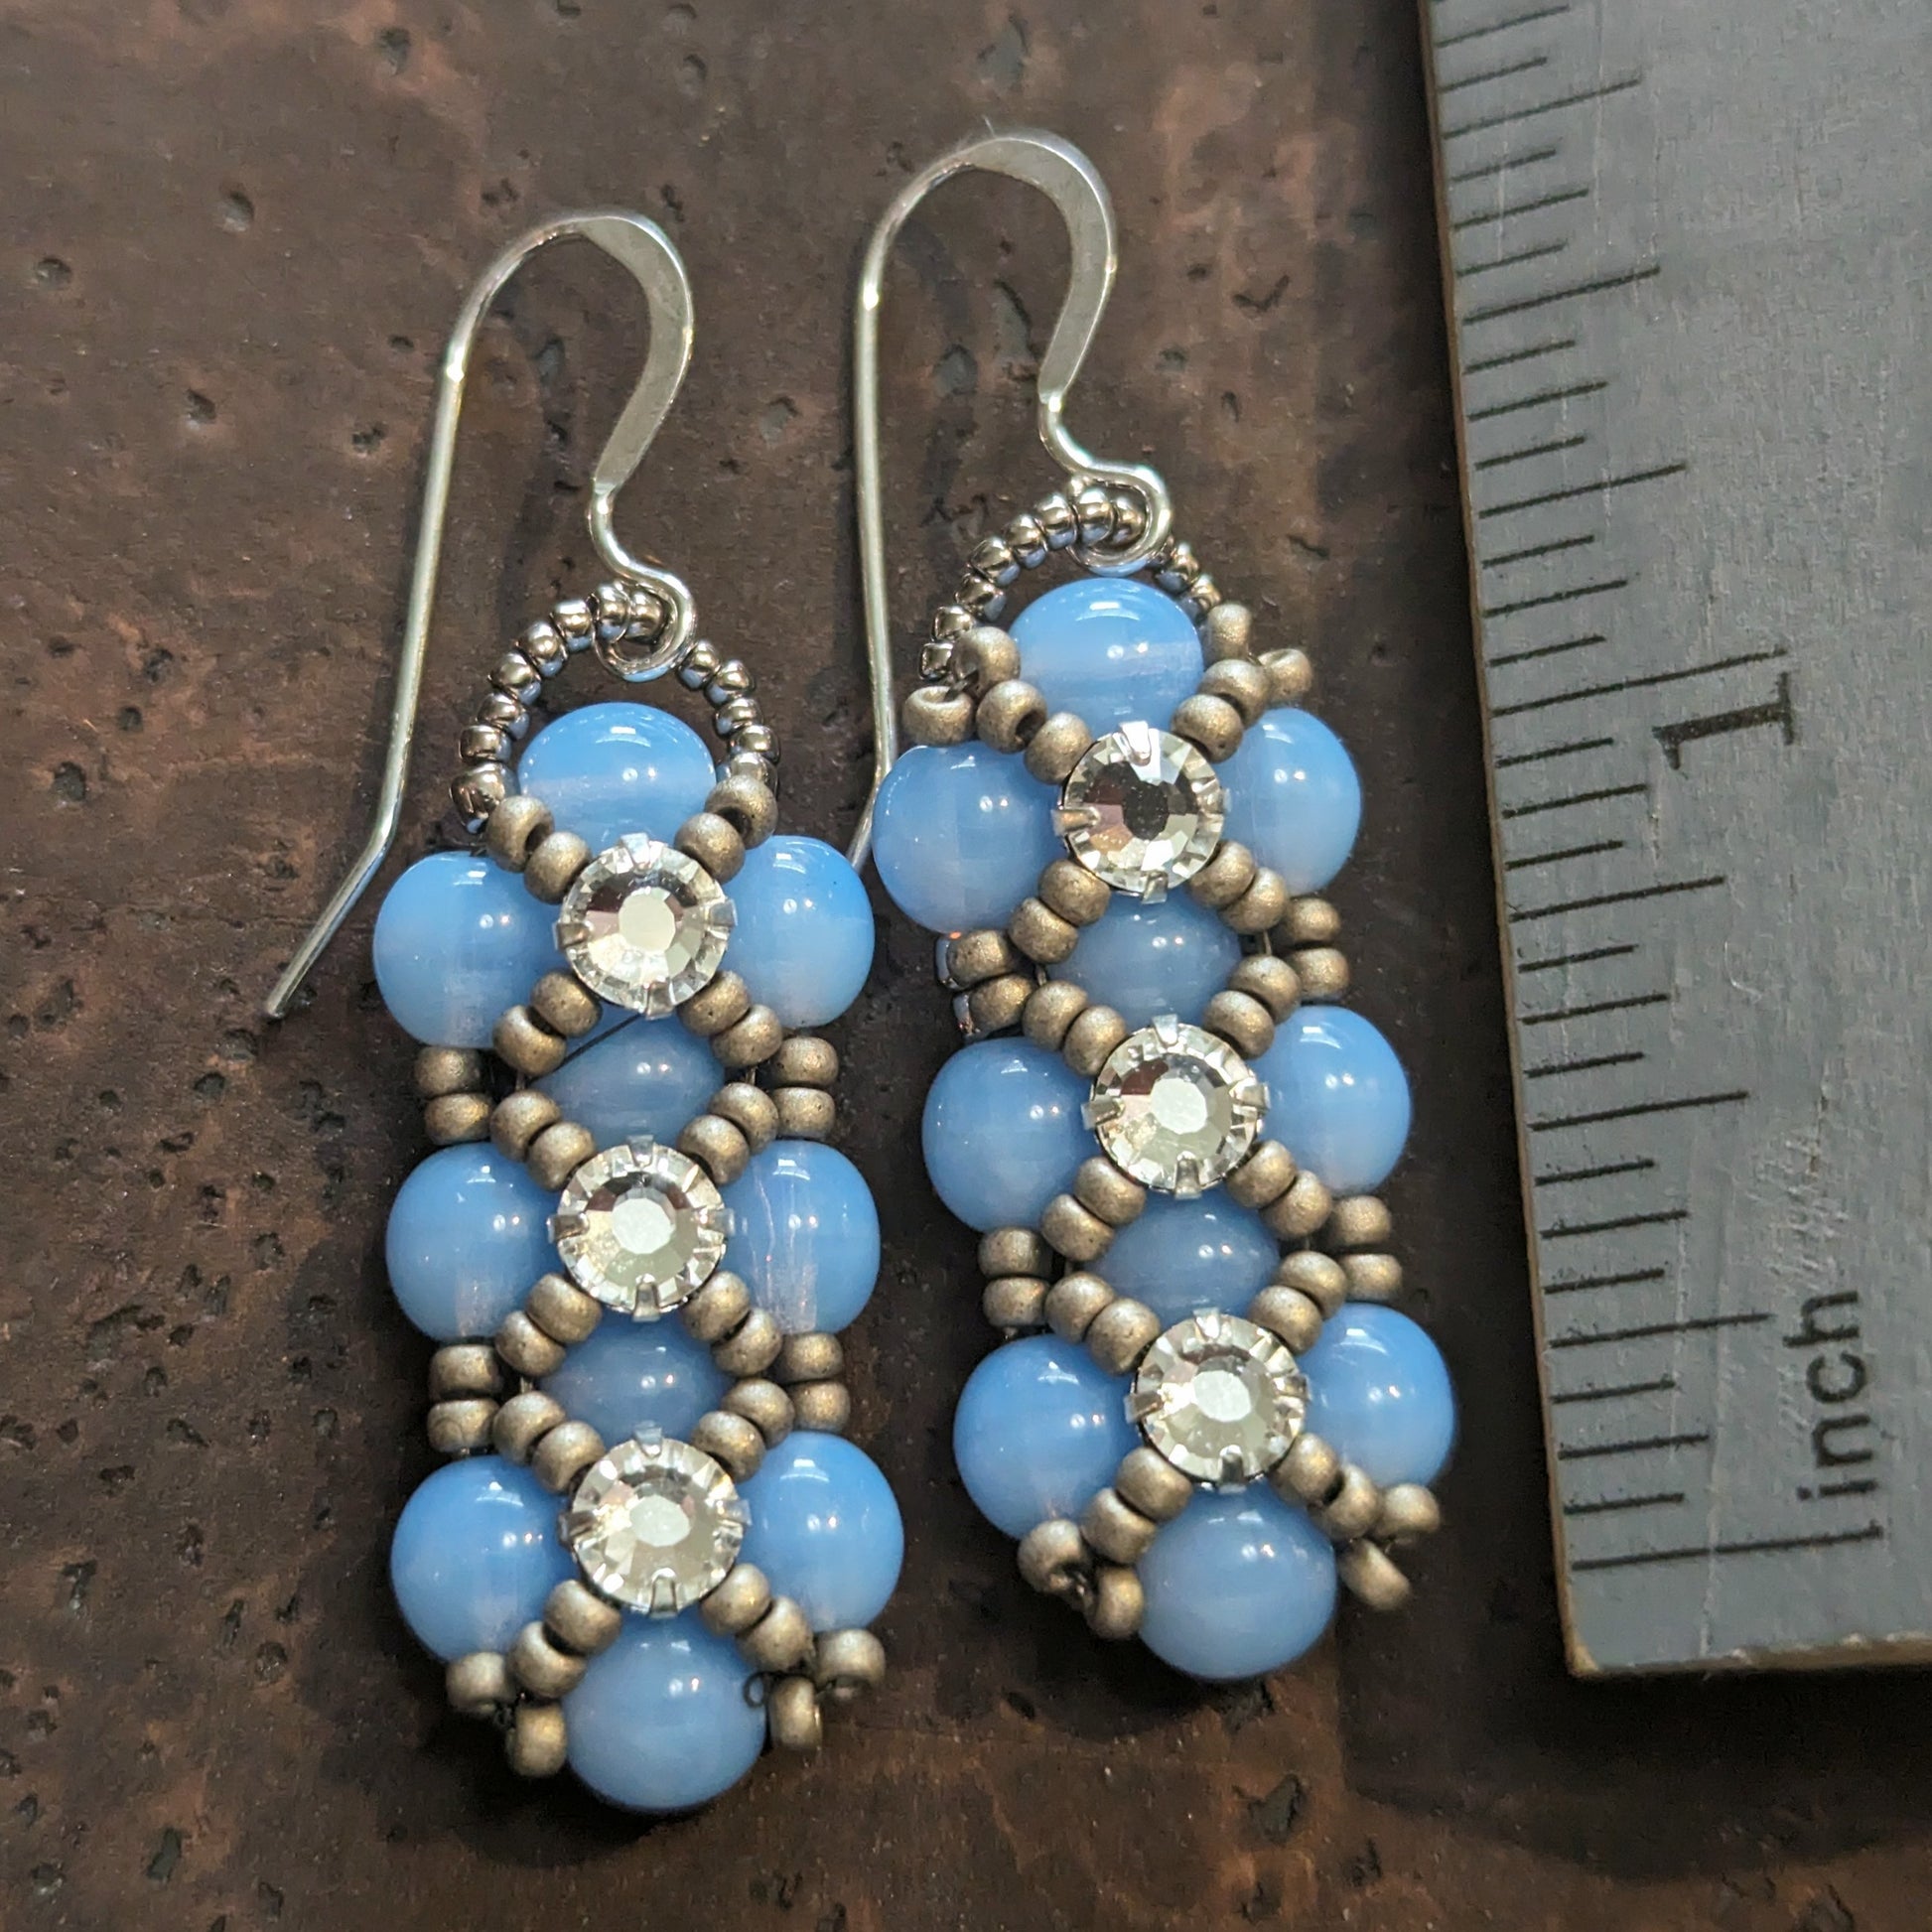 Silver and pale opal blue earrings on a cork-like dark brown background next to a ruler. The earrings have a background of light cloudy blue and there are matte silver seed beads in x-shape securing three clear rhinestones in a vertical row. The earrings have silver ear wires.